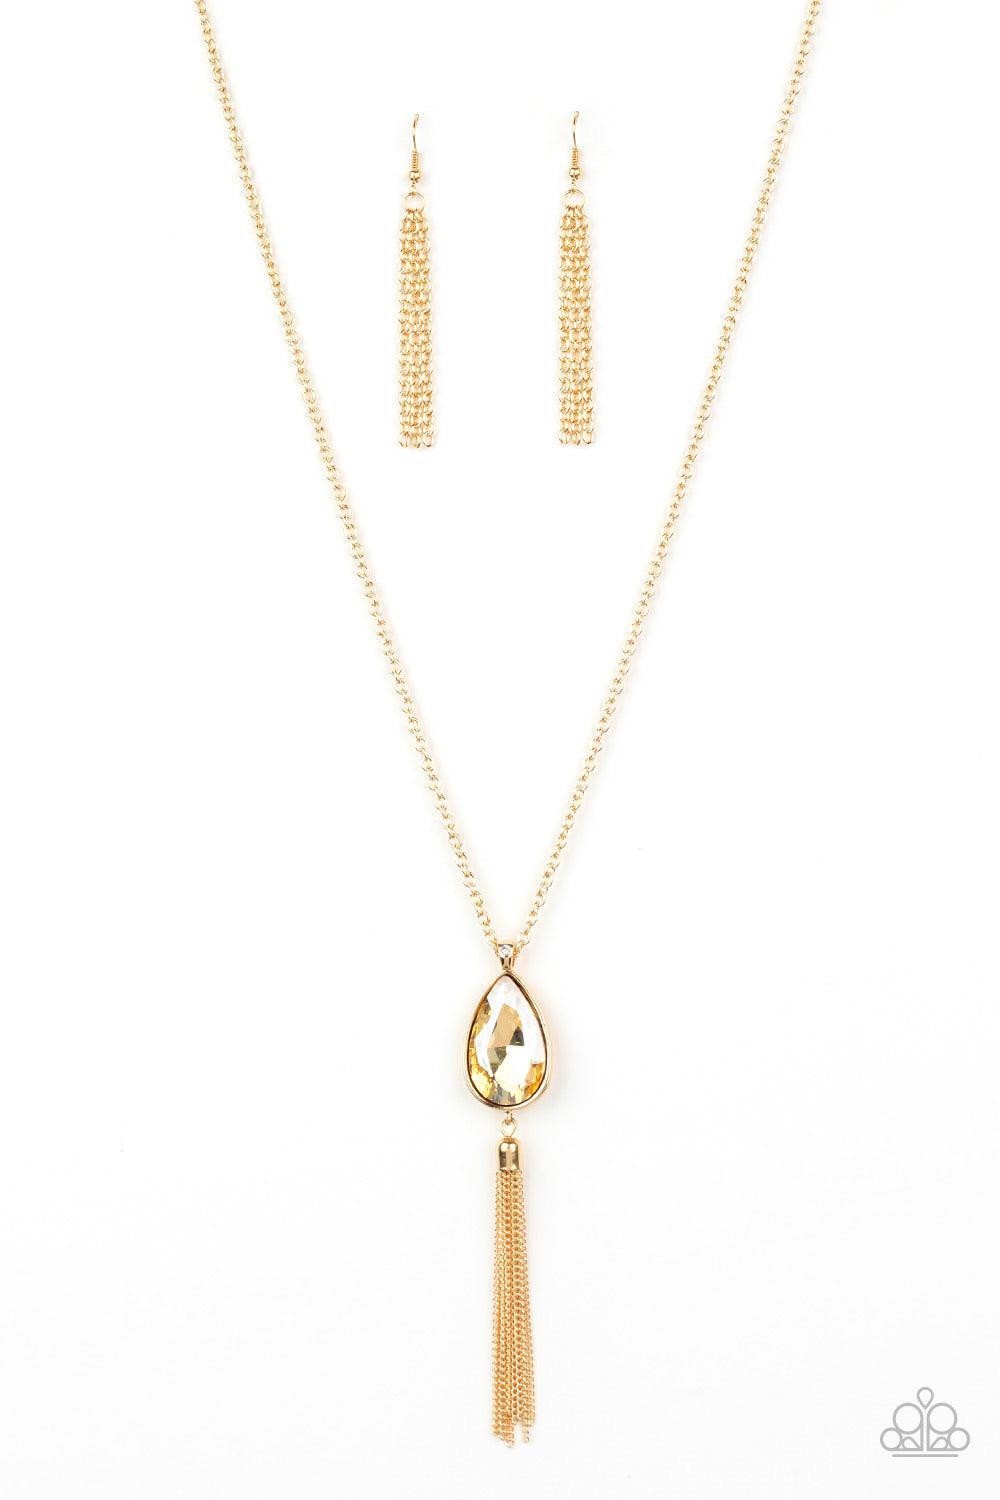 Paparazzi Accessories Elite Shine - Gold A golden teardrop gem swings from the bottom of a lengthened gold chain for a dramatic look. A shimmery gold chain tassel swings from the bottom of the pendant for a glamorous finish. Features an adjustable clasp c